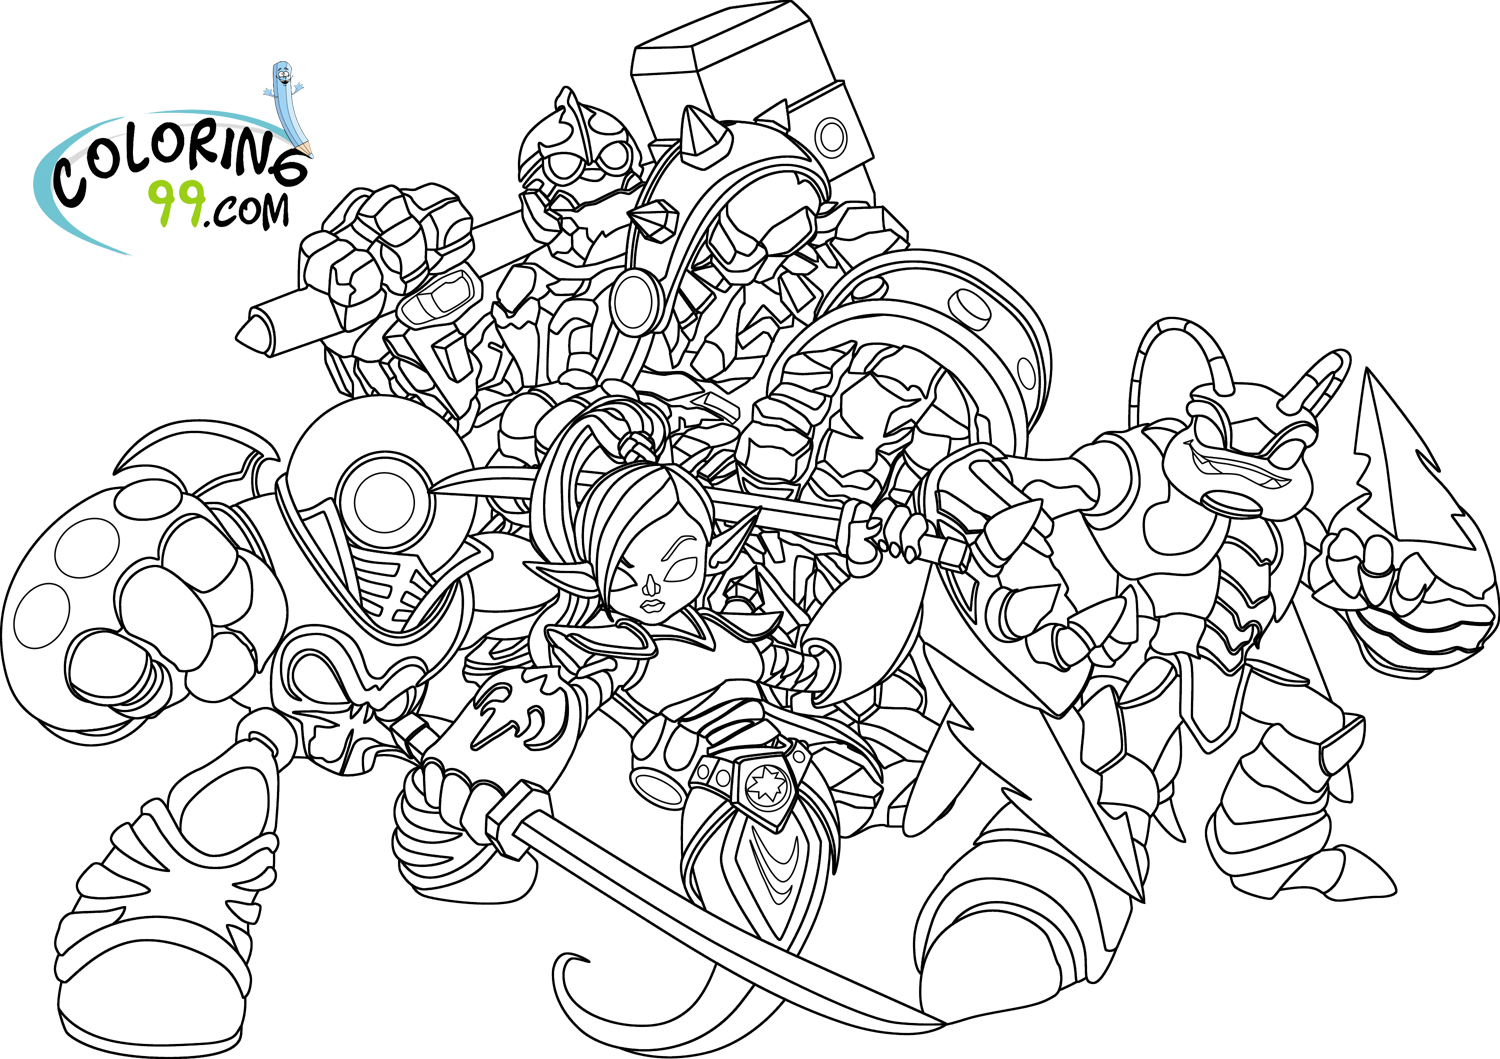 Skylanders Giants Coloring Pages | Minister Coloring